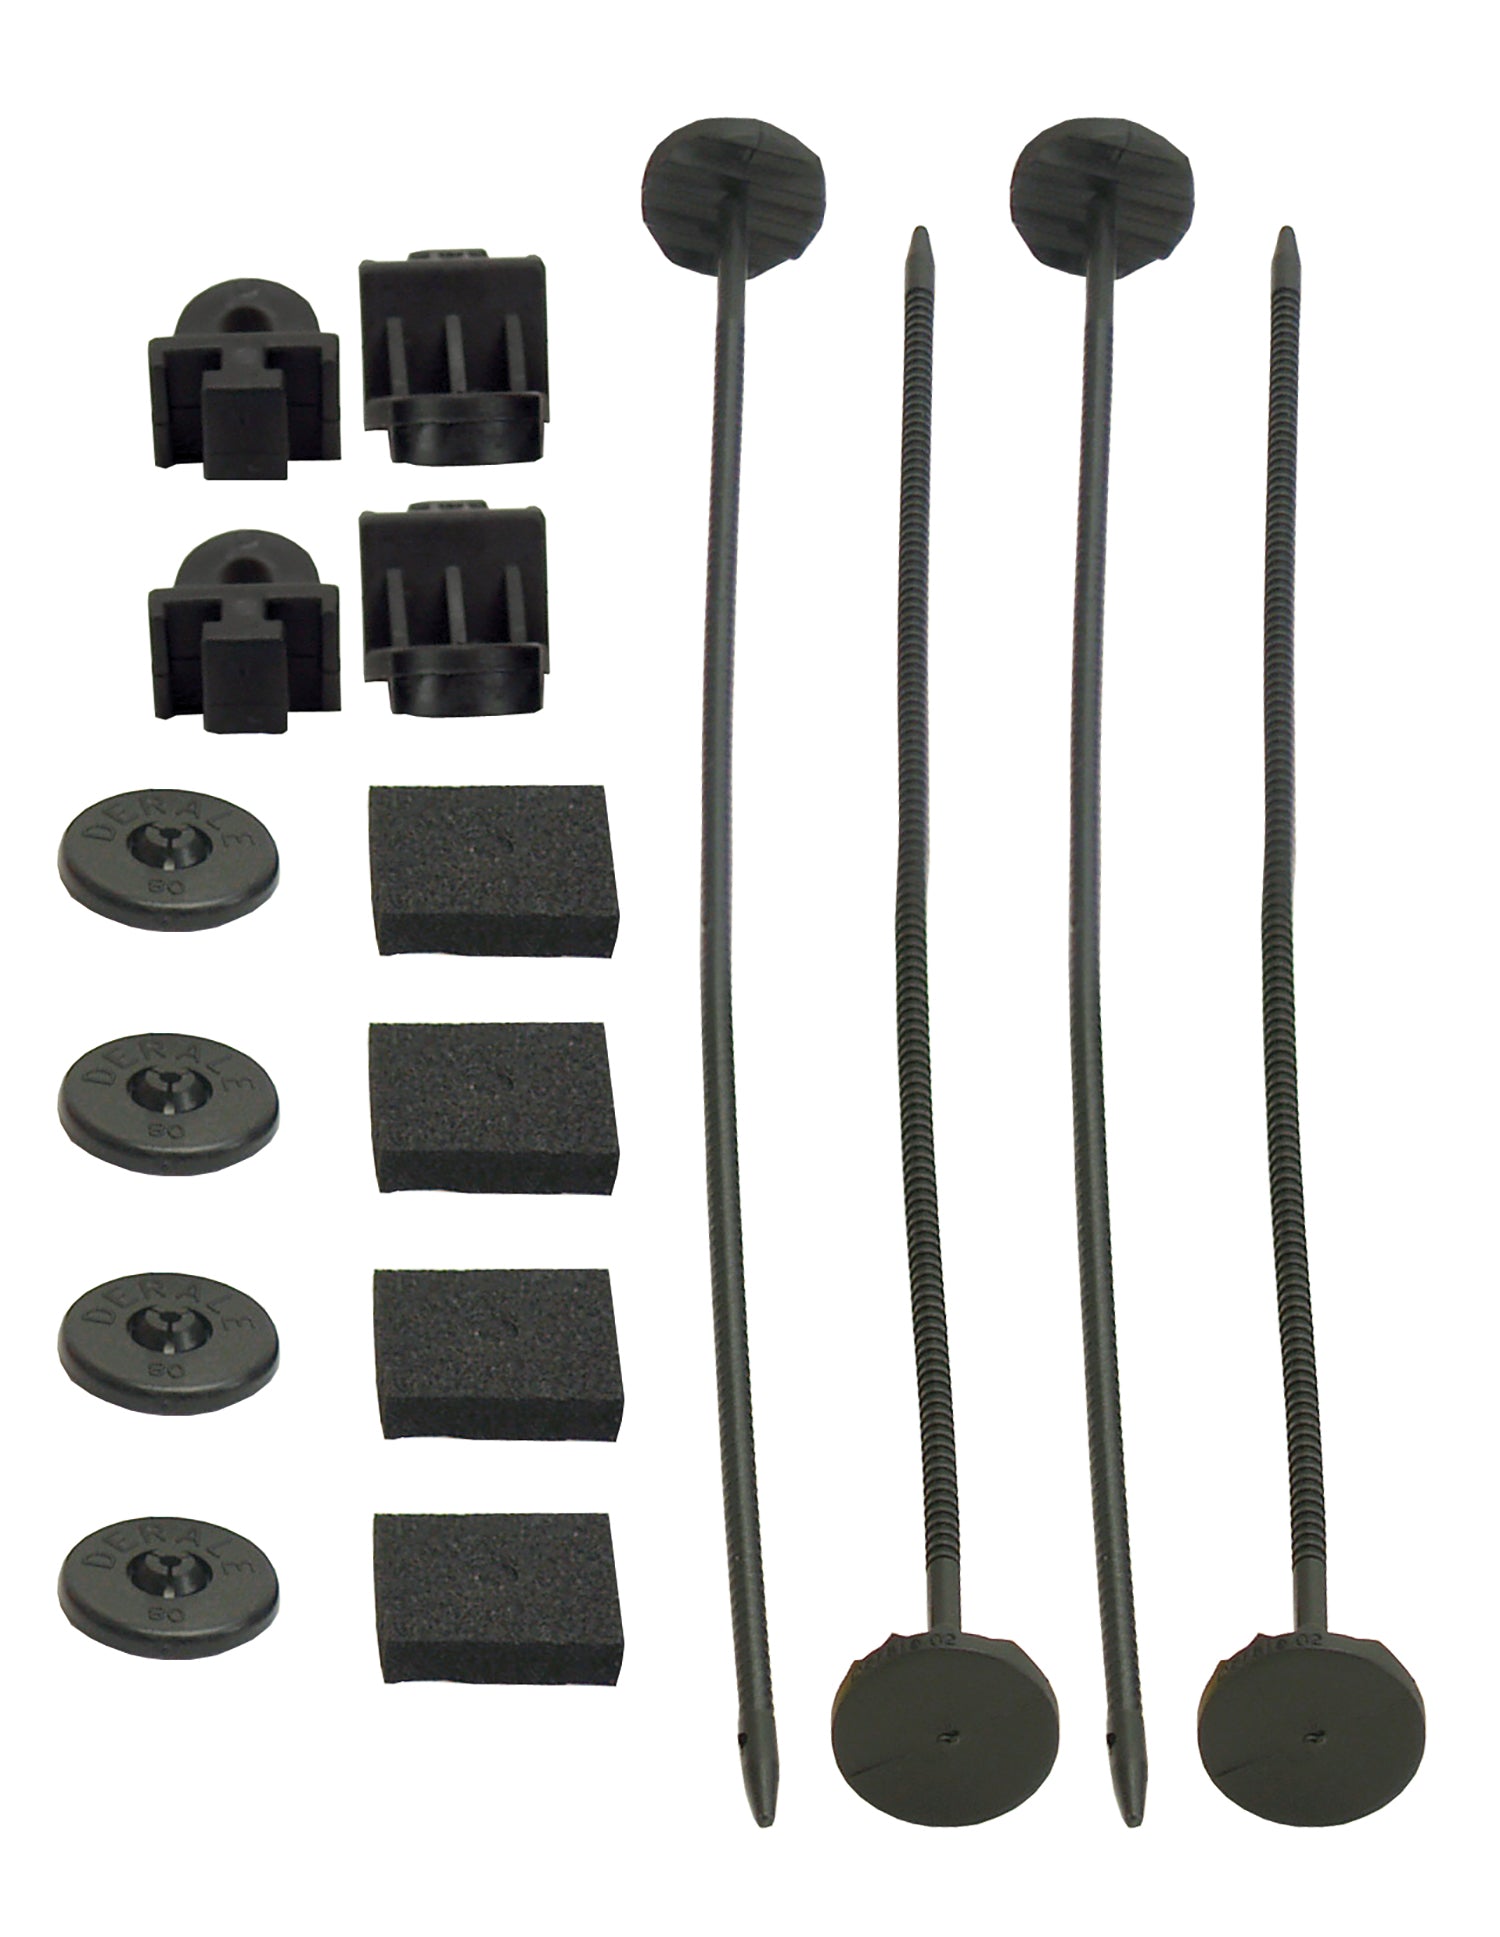 Electric Fan Mounting Kit, Plastic Rods, Clips and Mounting Feet